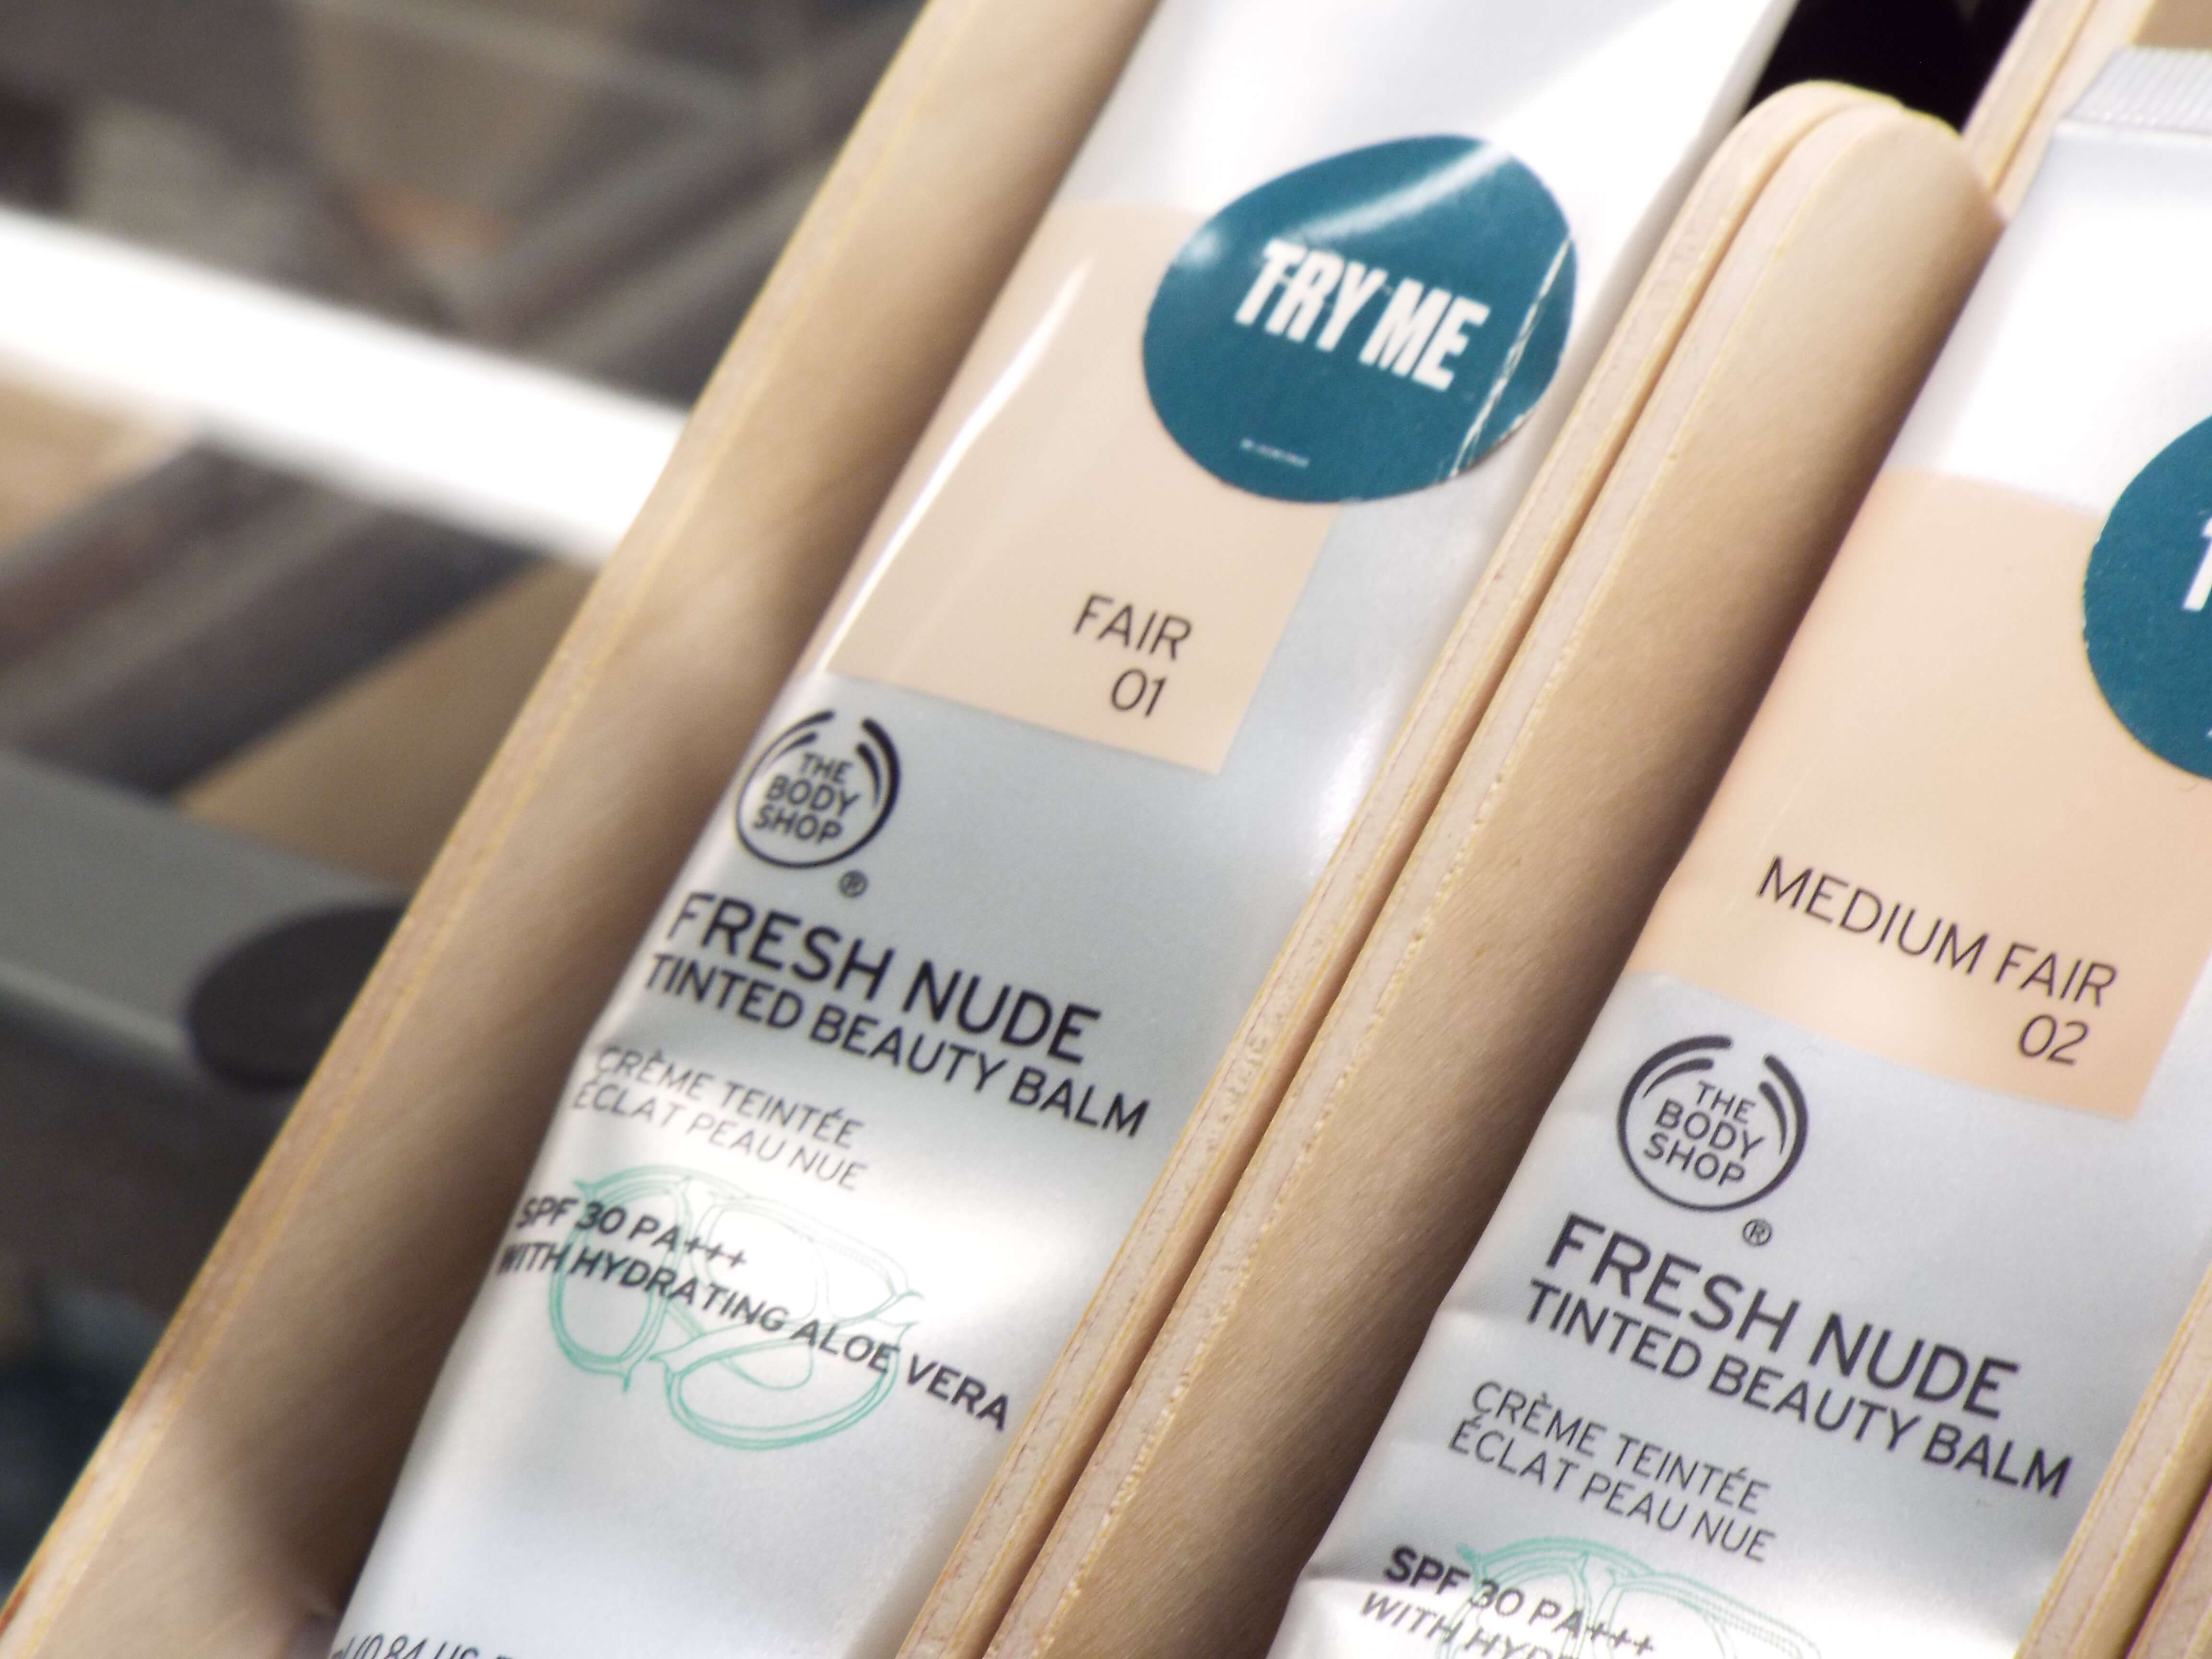 The Body Shop Fresh Nude Tinted Beauty Balm in shade 01 Fair and housed in silver squeeze-y tube.